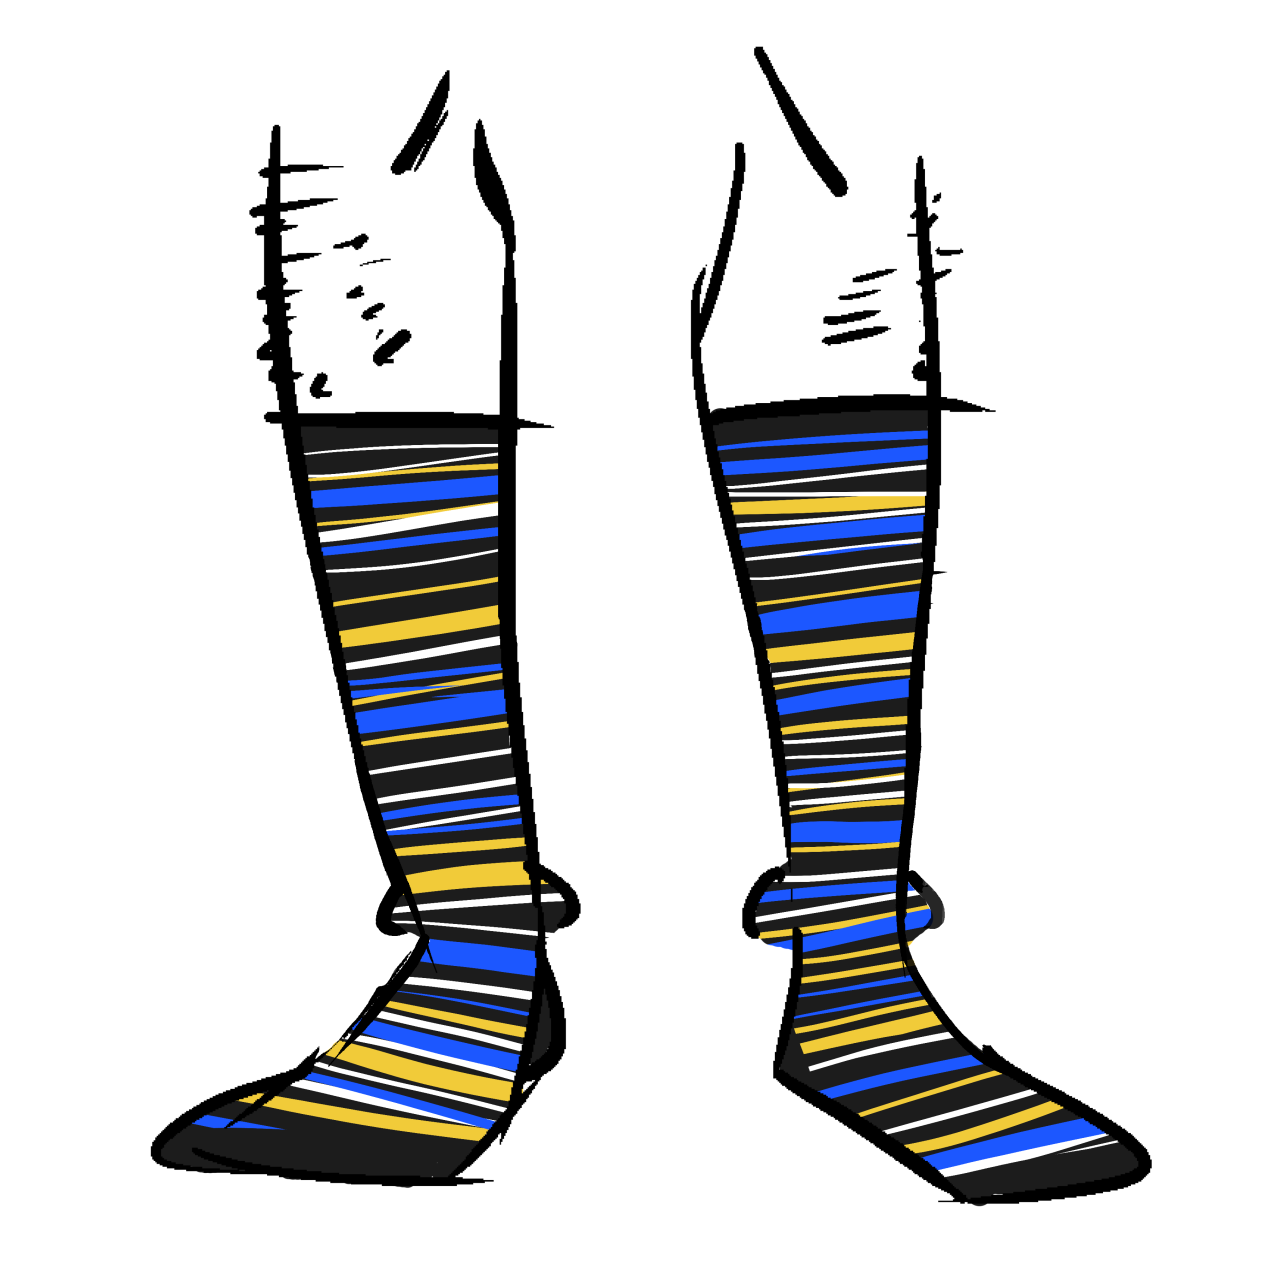 Black socks with blue, yellow, and white stripes